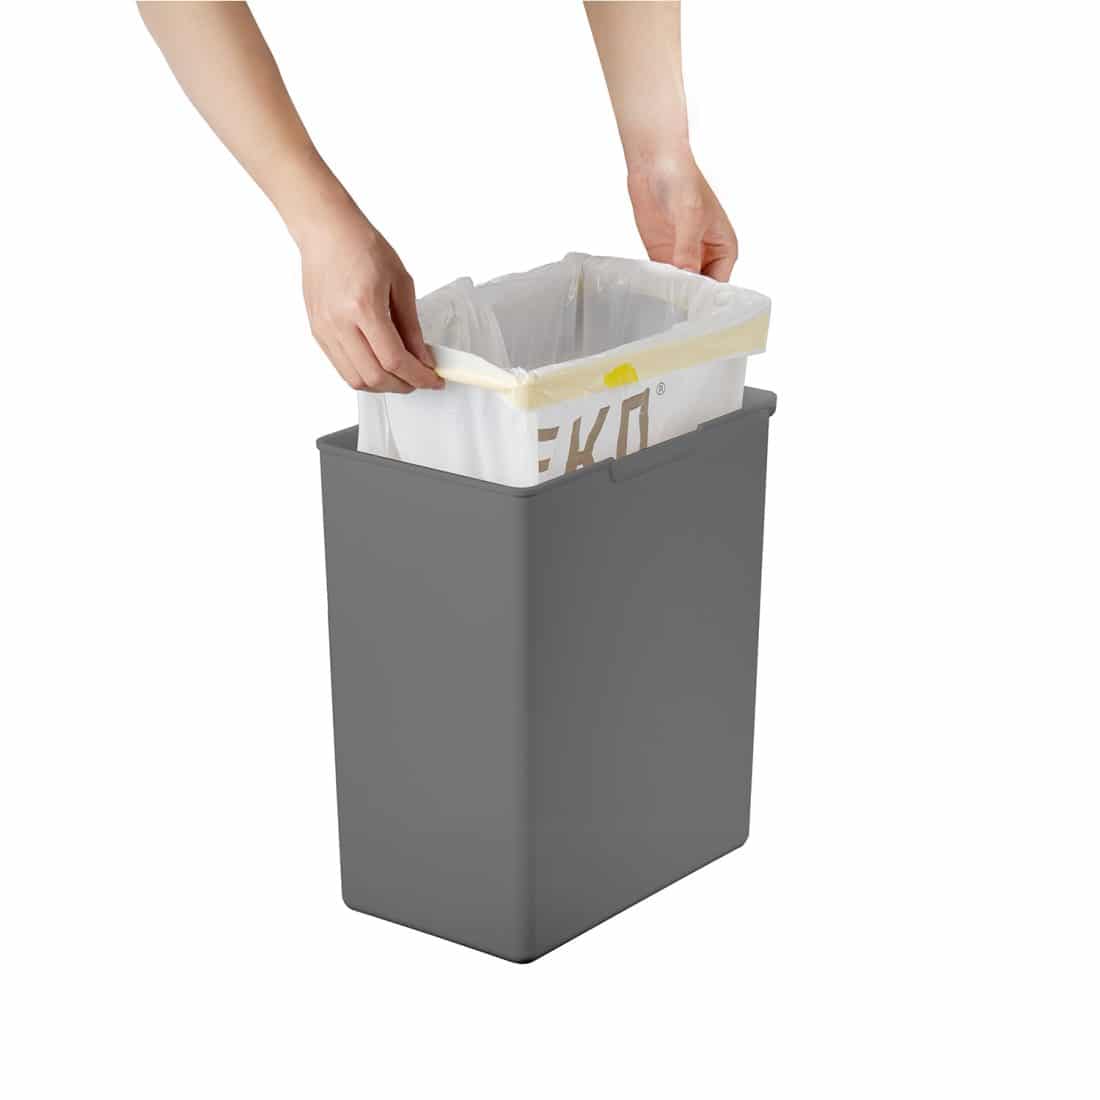 Morandi Touch Bin 20L Separate waste bin, connectable for recycling Grey